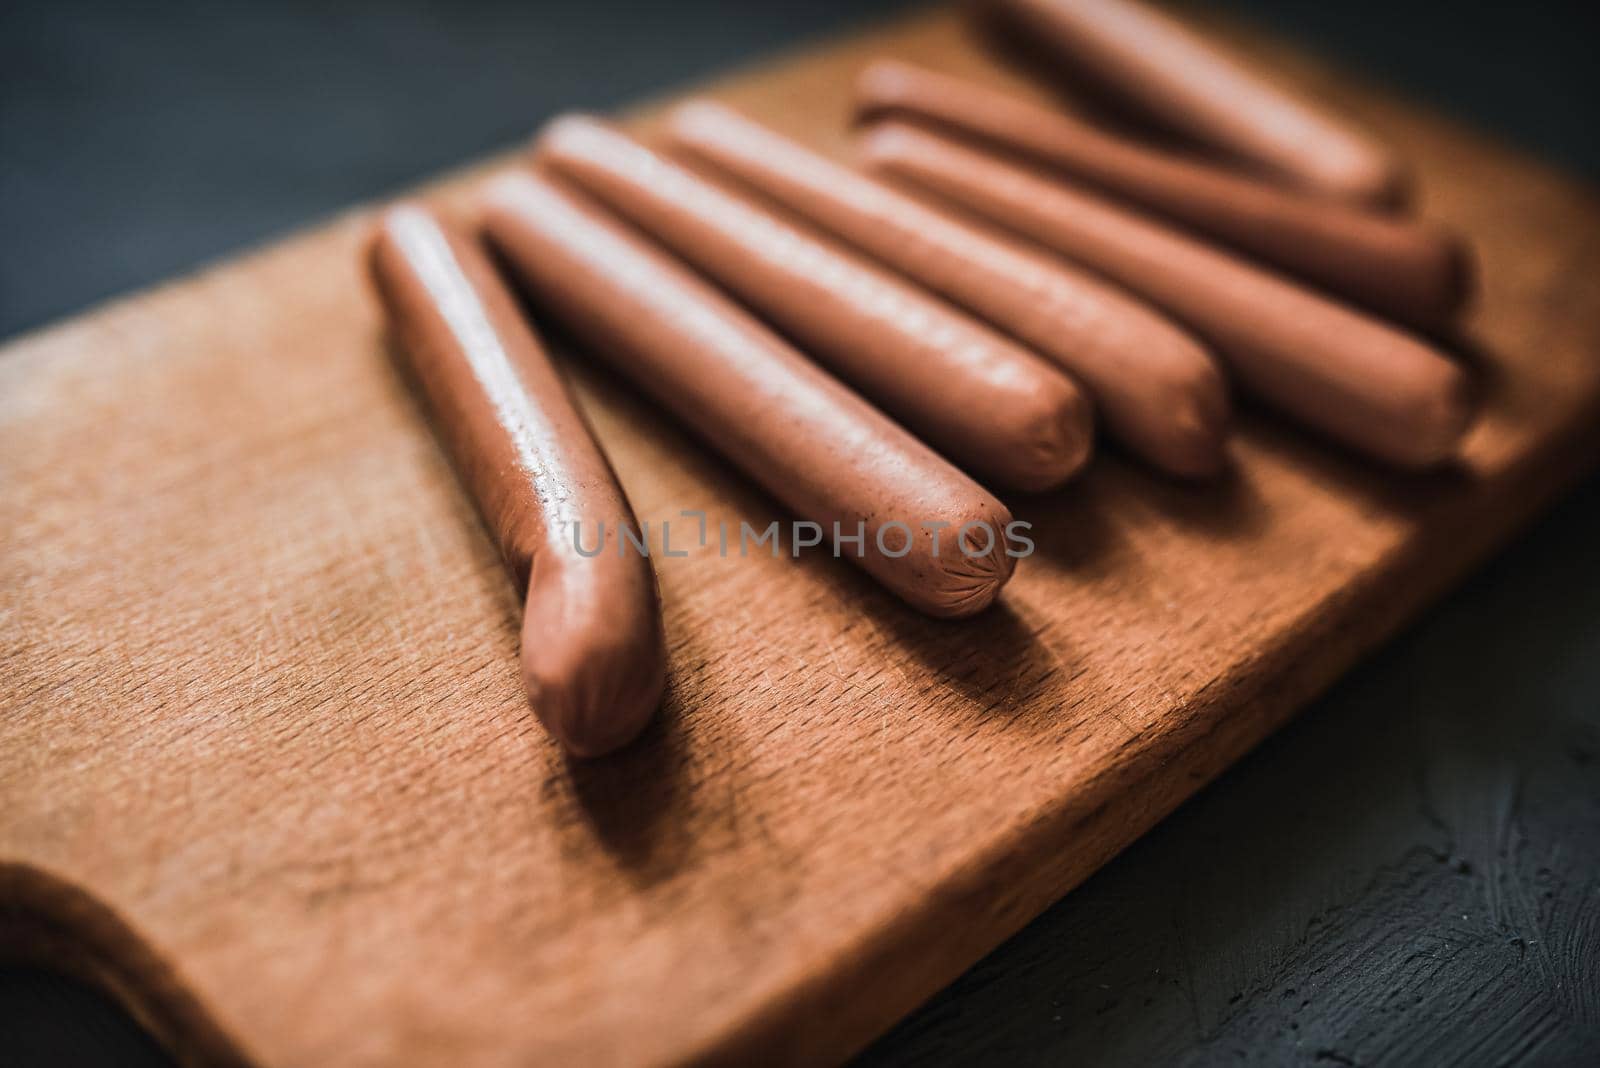 Boiled fried sausages sausages lie on a wooden kitchen board scratched against a dark concrete background.